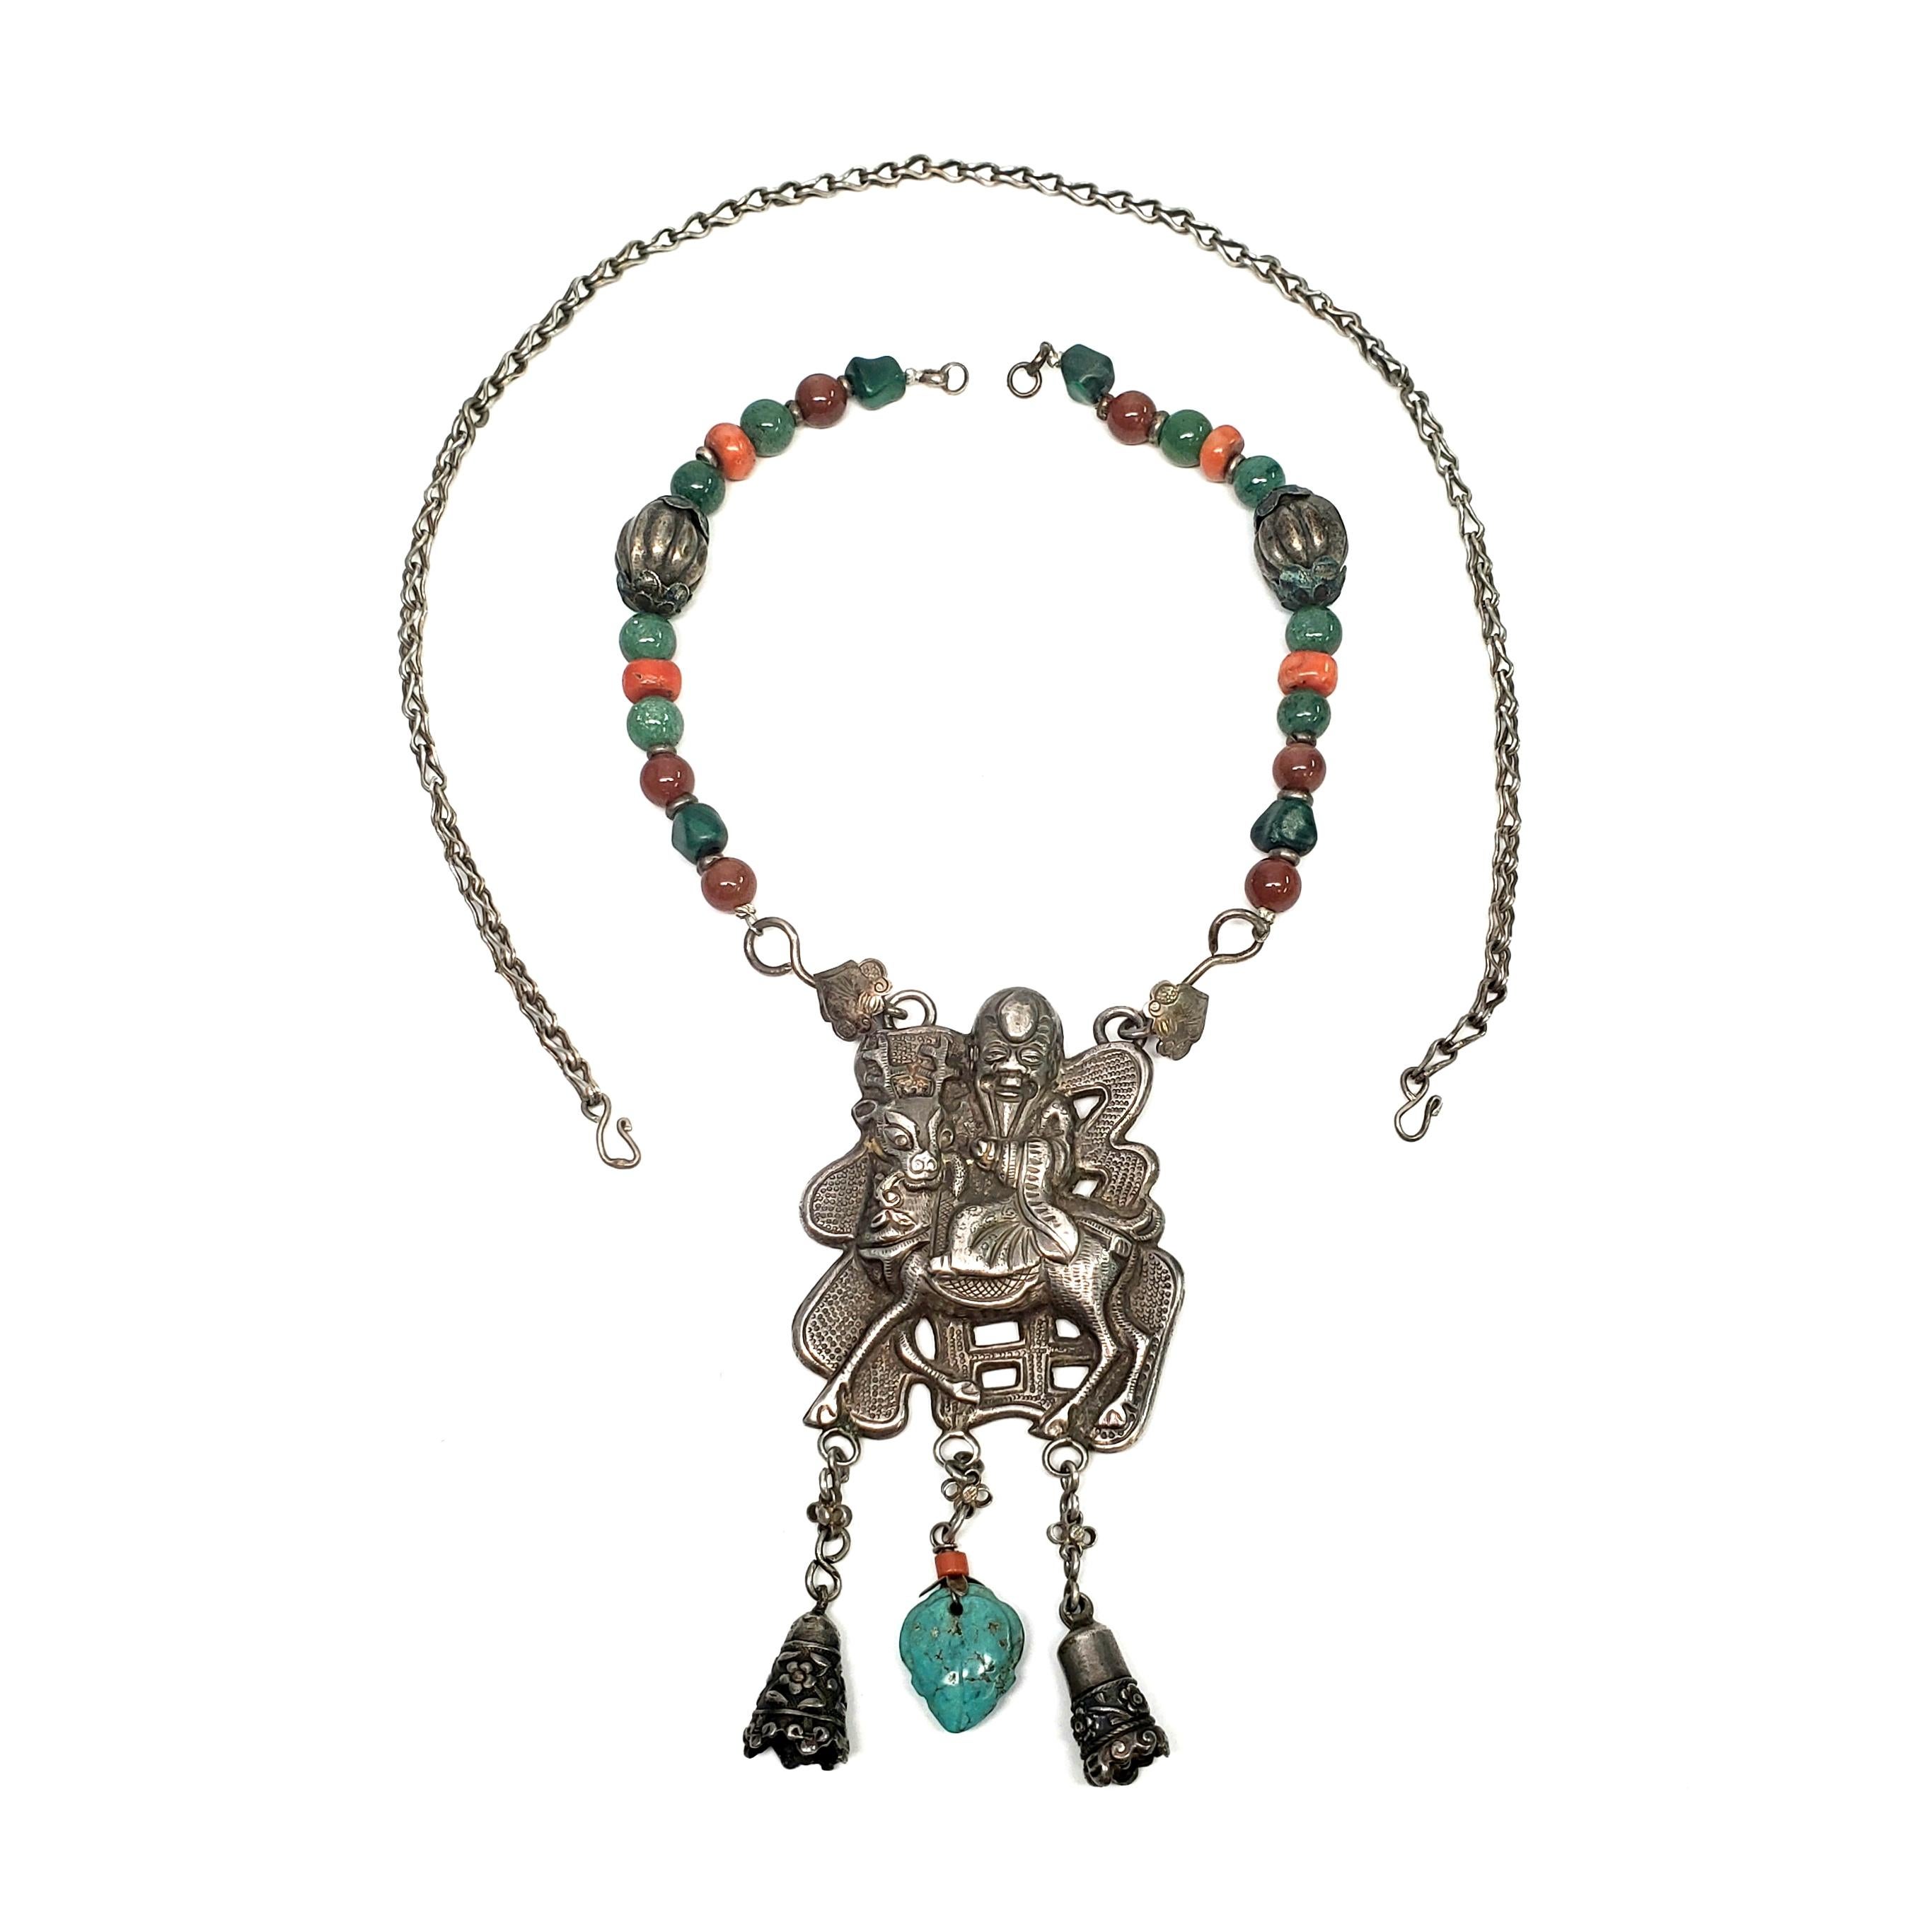 Antique Chinese Qilin - Kylin - amulet and beaded necklace.

The Qilin is a Chinese mythical creature, often called a Chinese unicorn. This amulet features a happy and prosperous rider on the Qilin for luck and good fortune. The amulet hangs from a